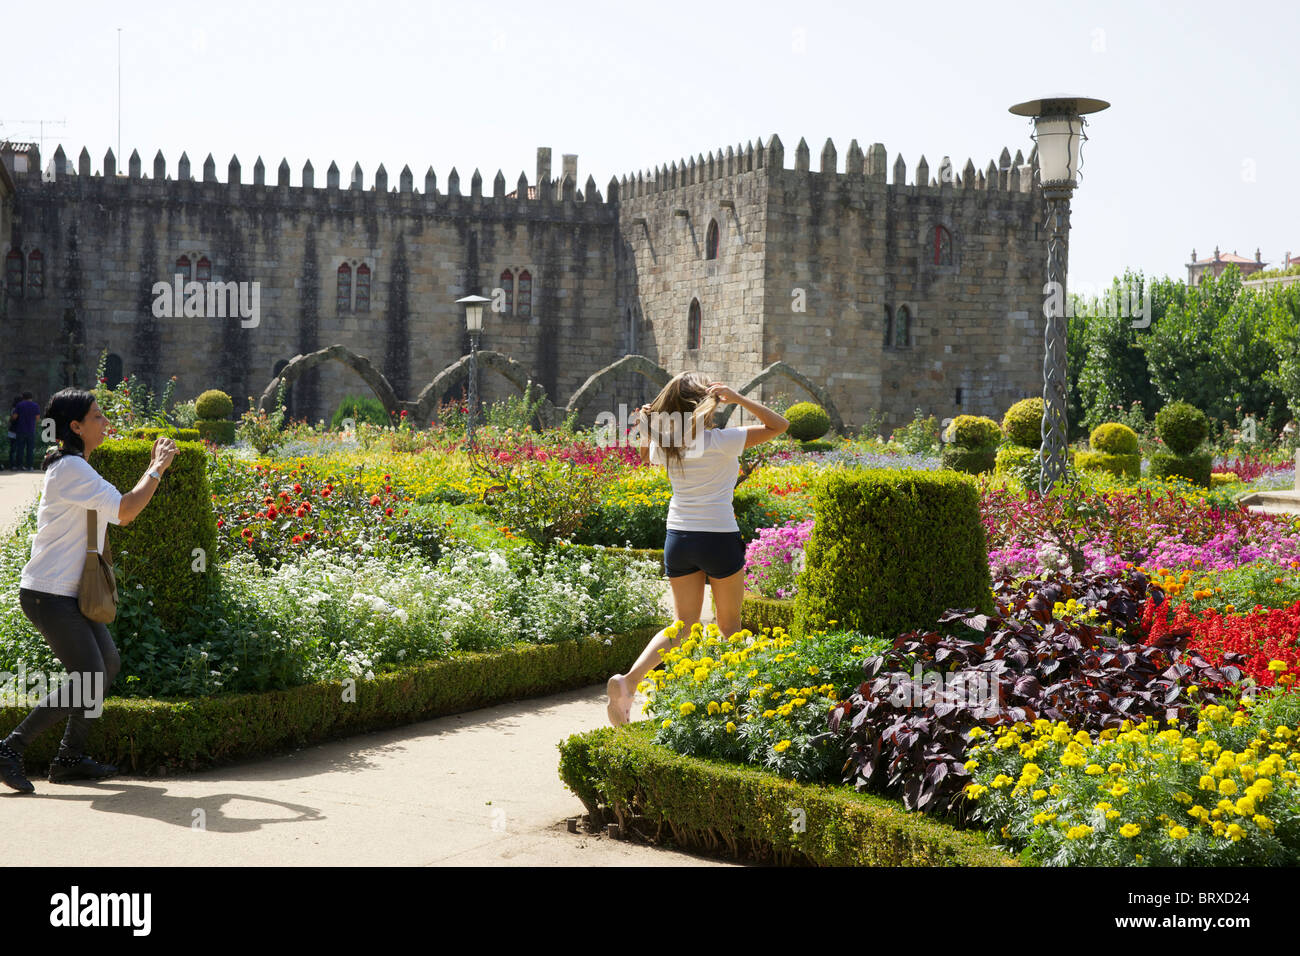 A girl taking a photo of another girl in the beautiful flower gardens in Braga, Portugal. Stock Photo